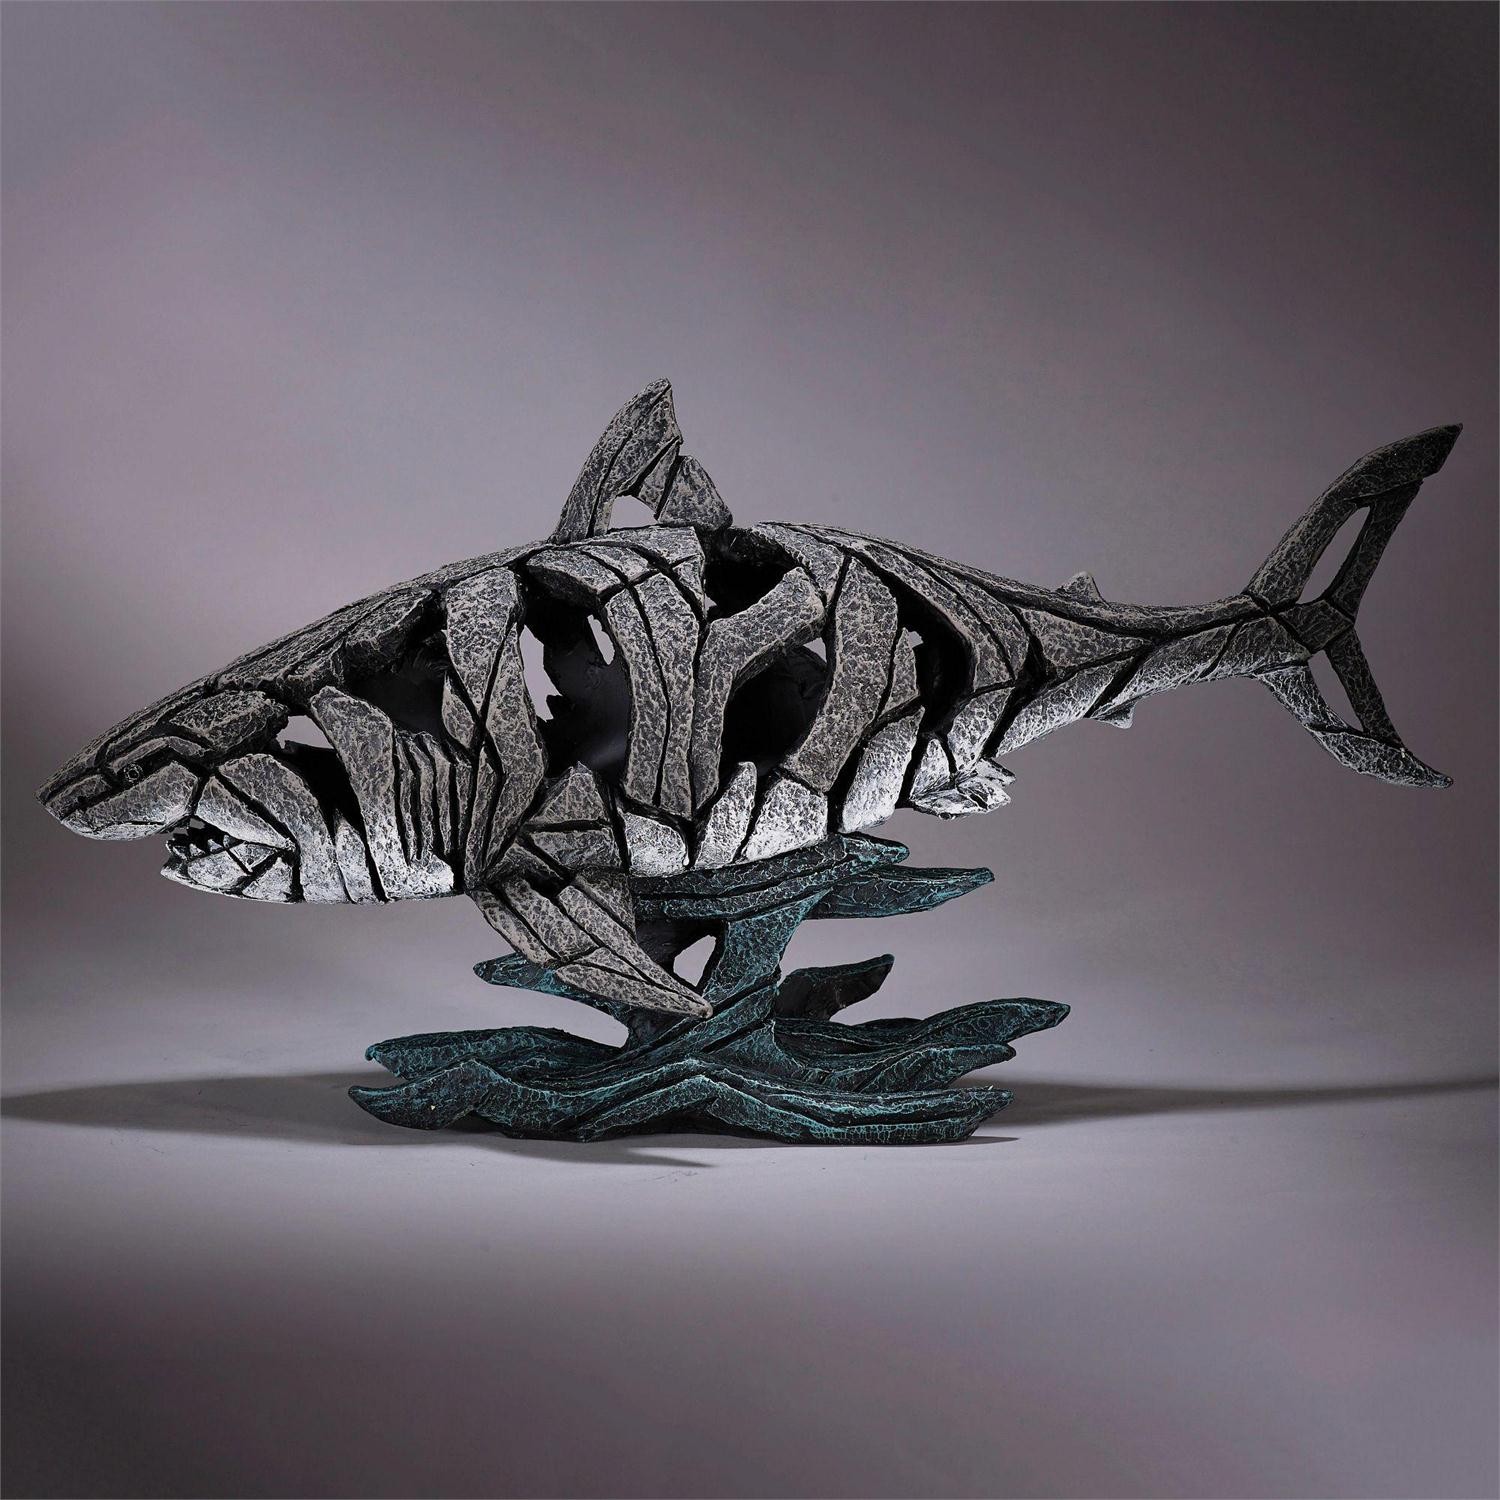 Enesco Gifts Matt Buckley The Edge Sculpture Shark Figurine Free Shipping Ivey's Gifts And Decor